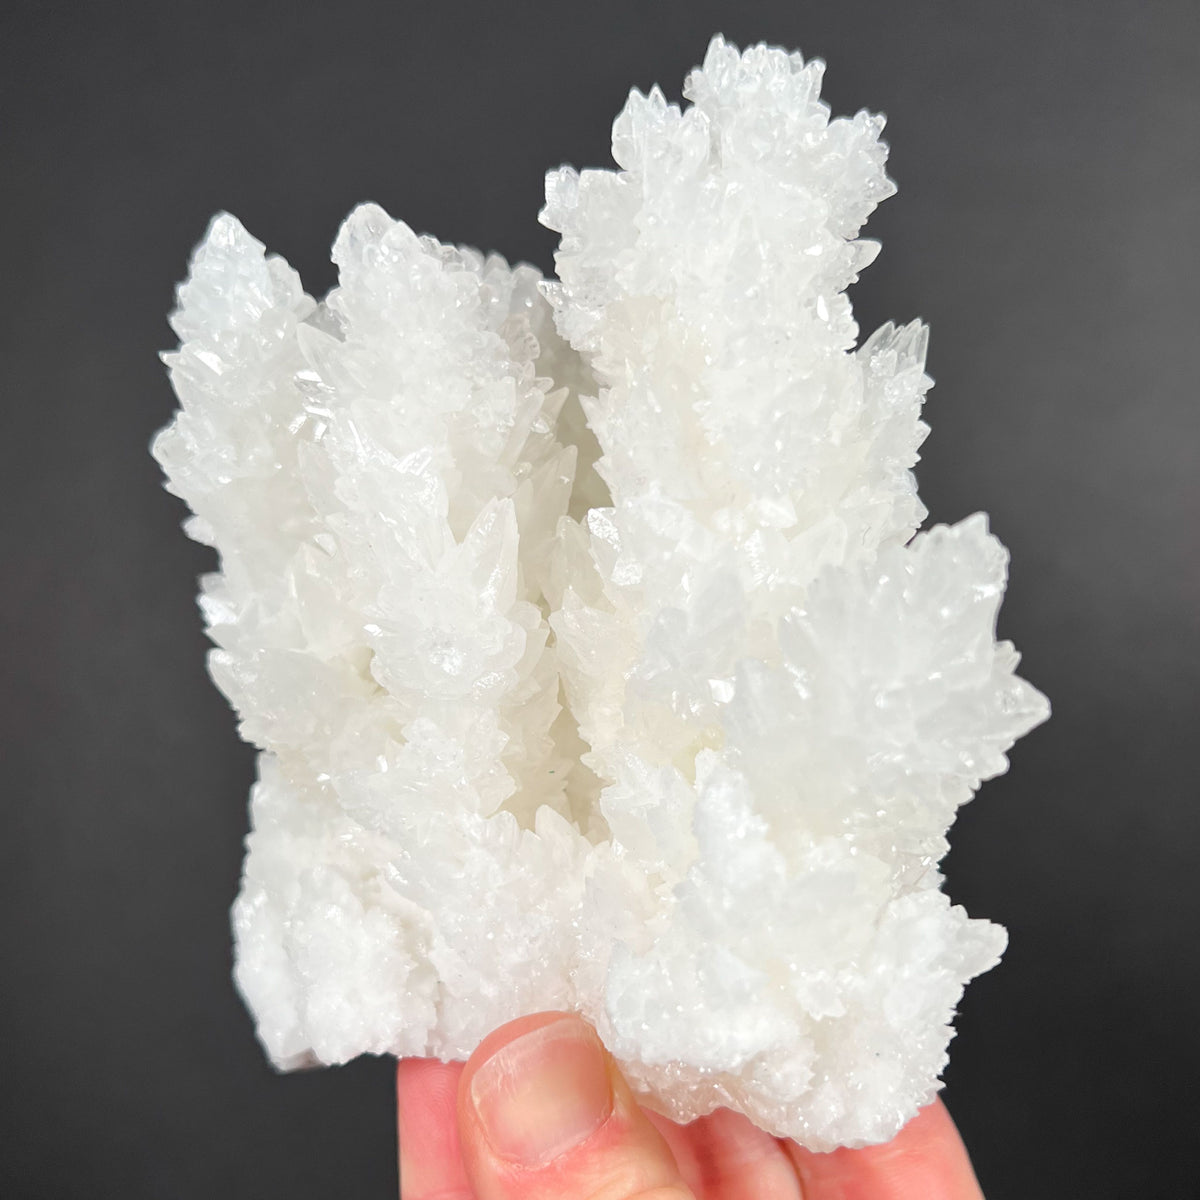 White Cave Calcite and Aragonite Crystals